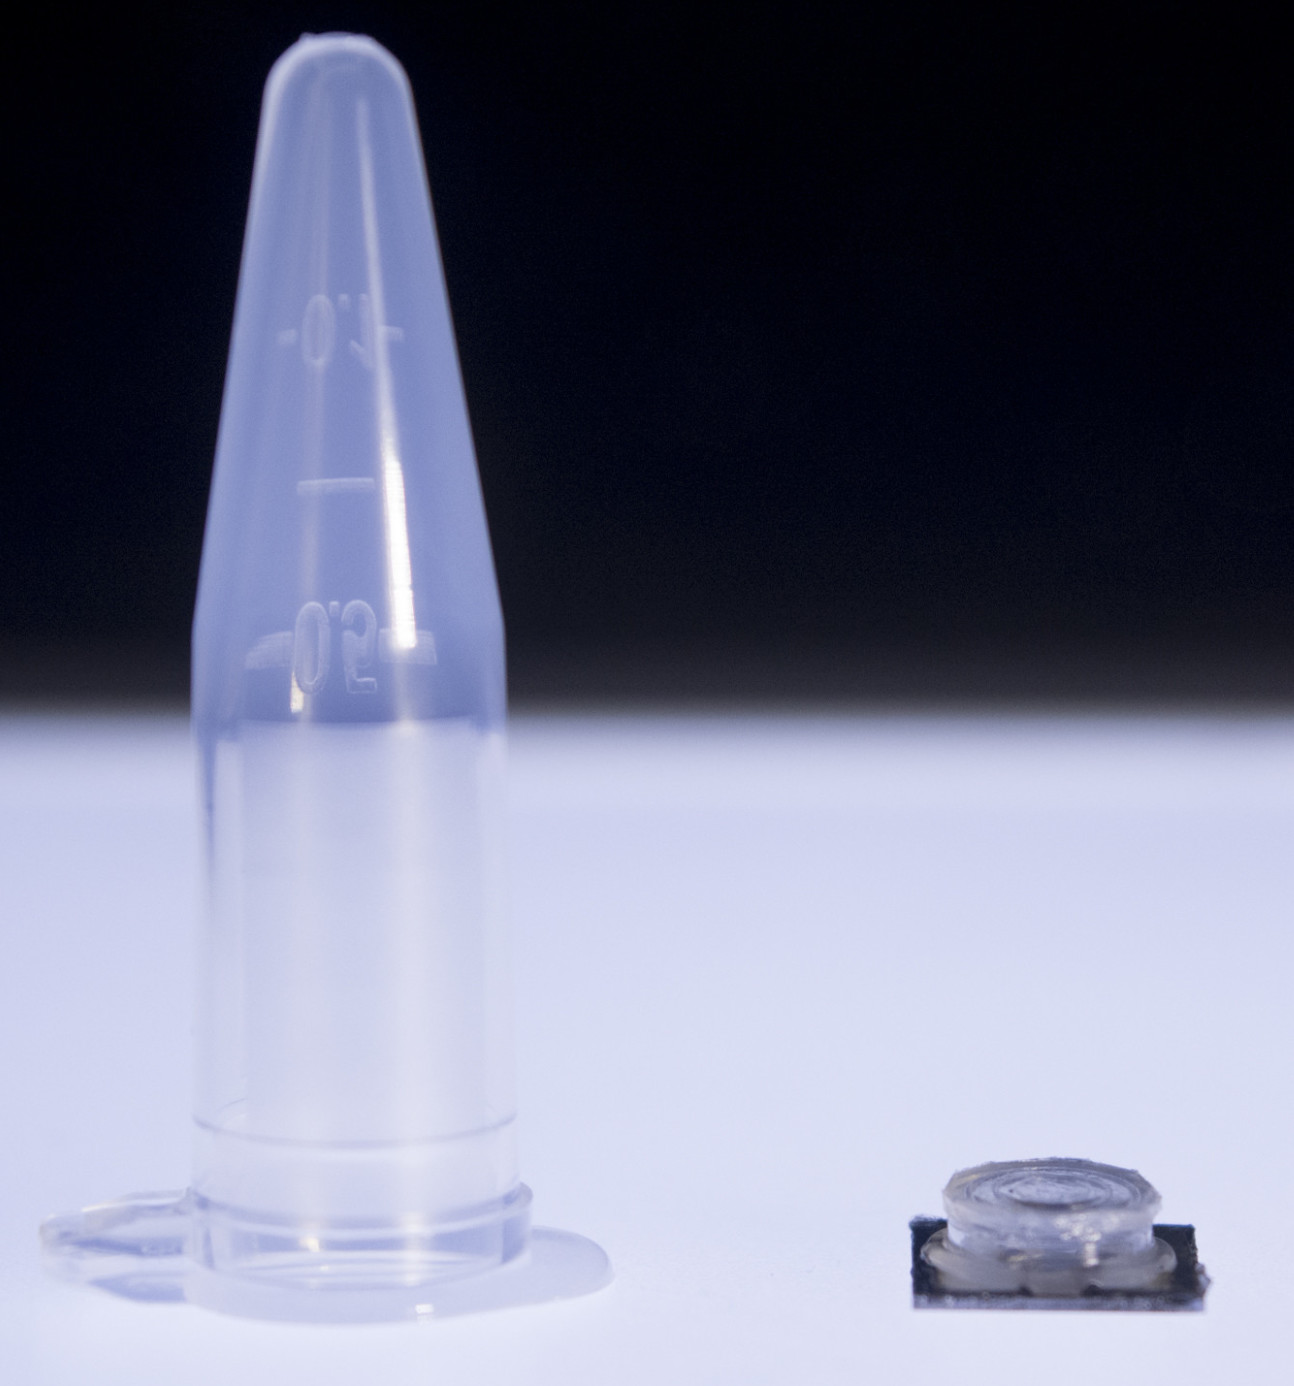 Photo of the chip next to a fluid collecting vial, demonstrating its small size